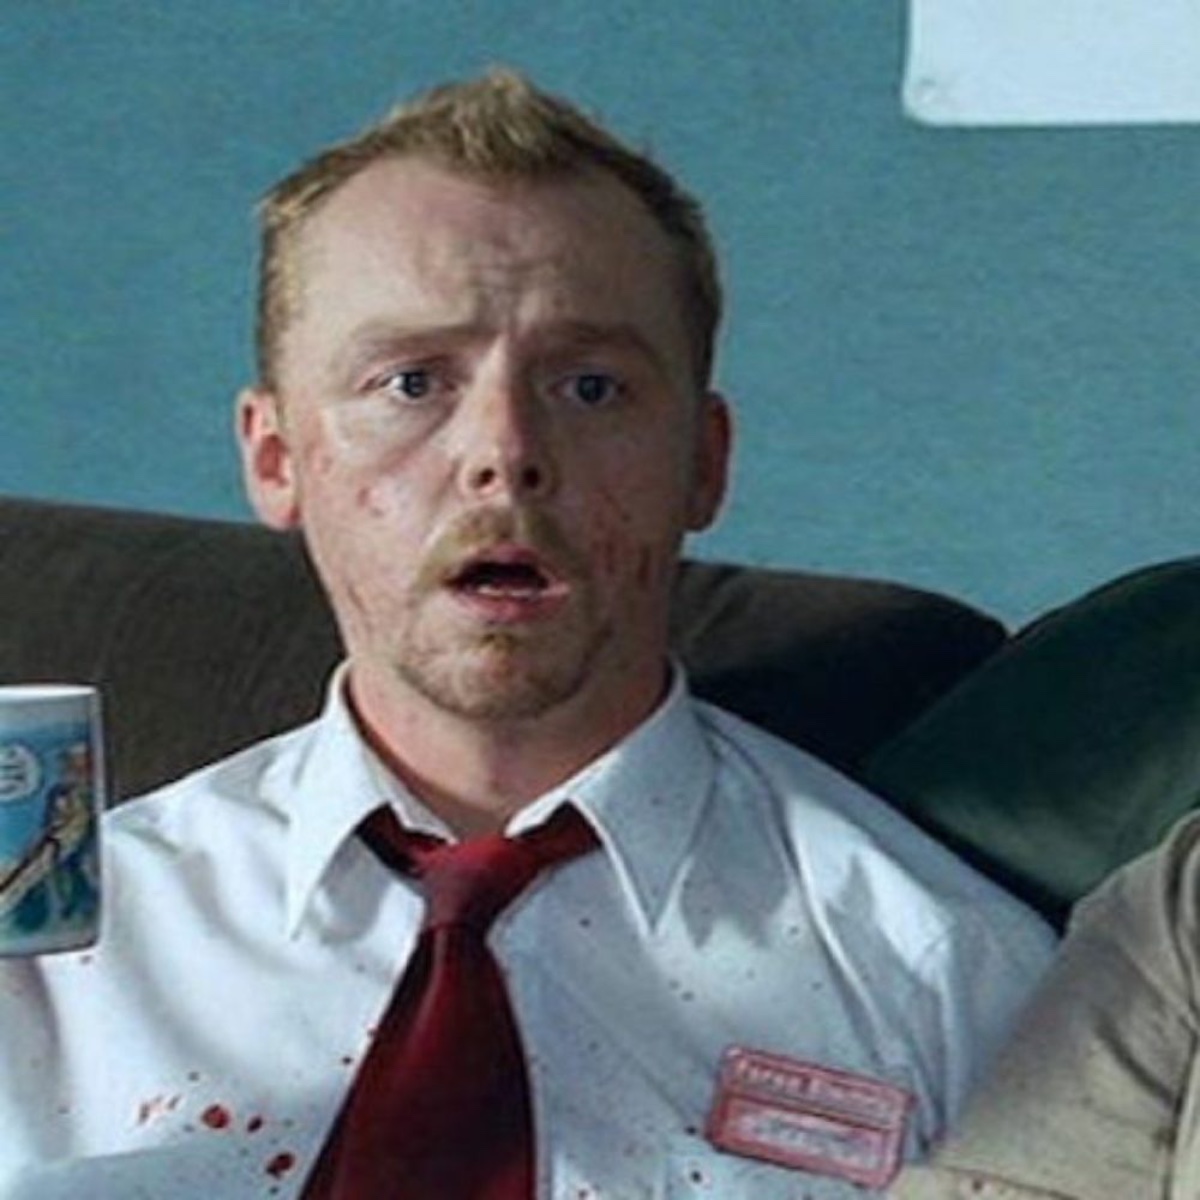 Shaun of the Dead Costume - Shaun of the Dead Fancy Dress - Shaun and Ed Cosplay - Shaun Red Necktie